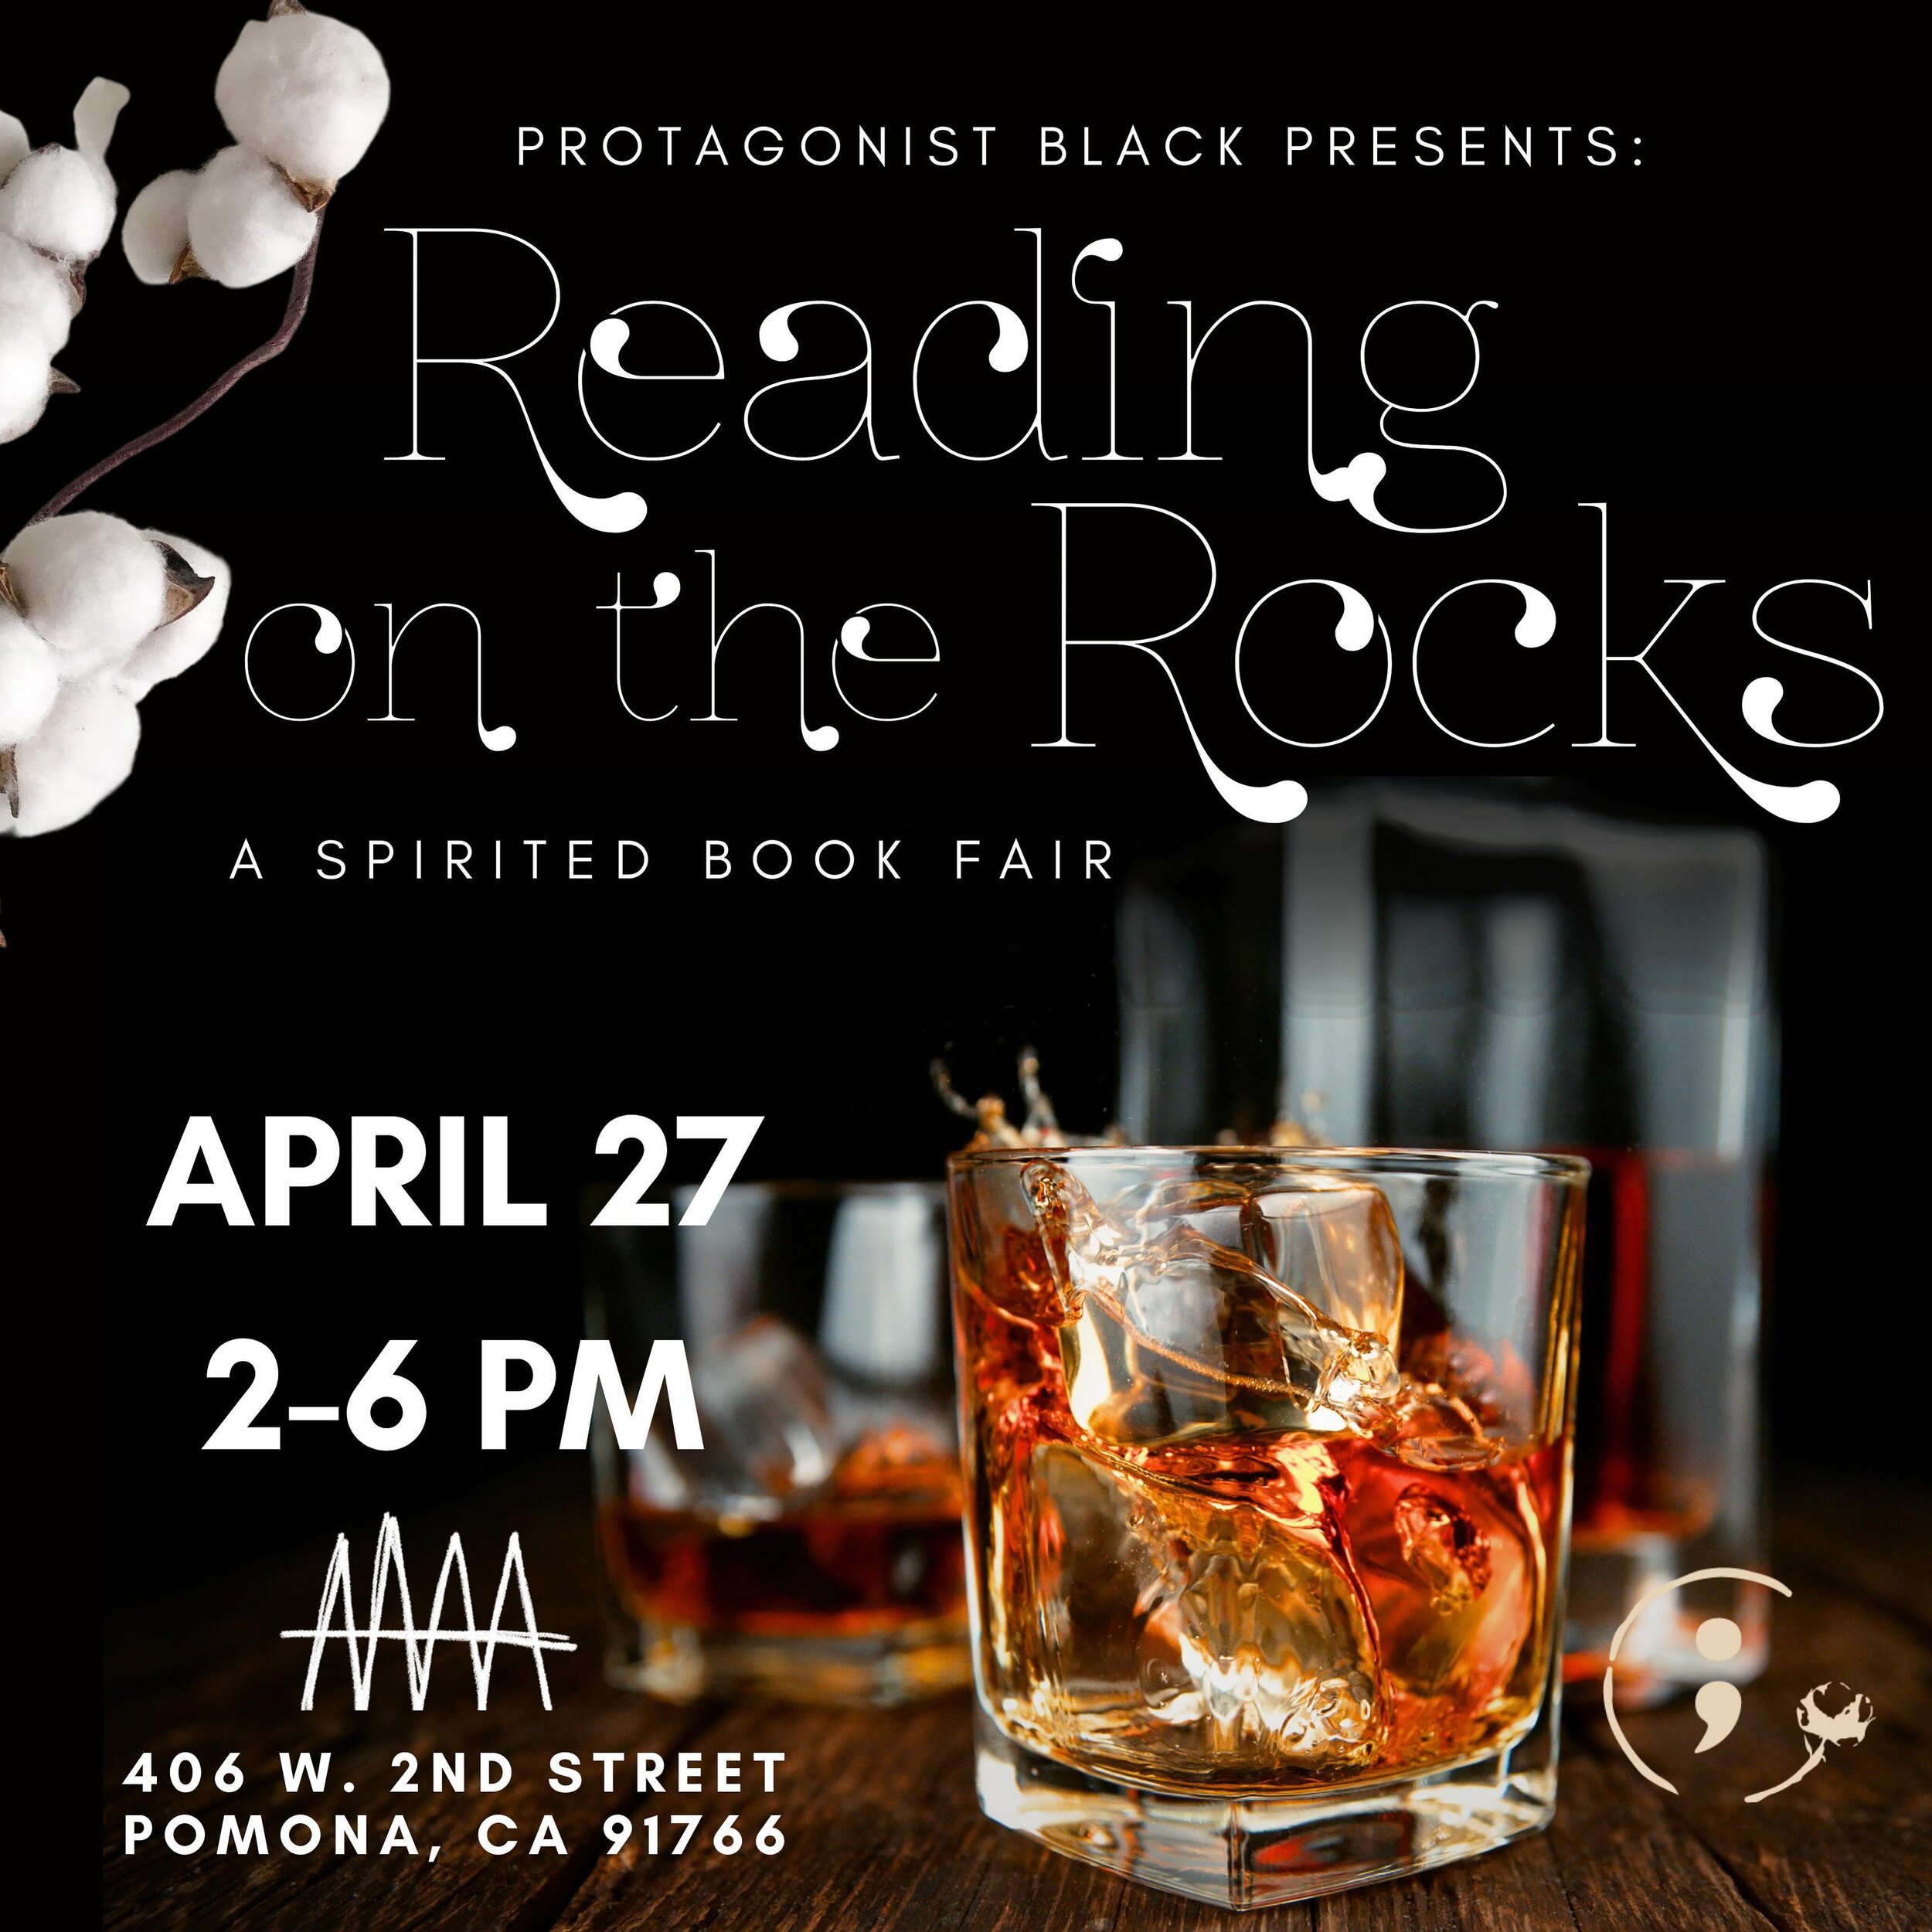 Reading on the Rocks feels like the book fair you remember and love from elementary school, but it grew up and became a bartender with a healthy love for coffee, art, local authors, and cool vibes. 
:
Come hang out with your bookish besties, celebrat